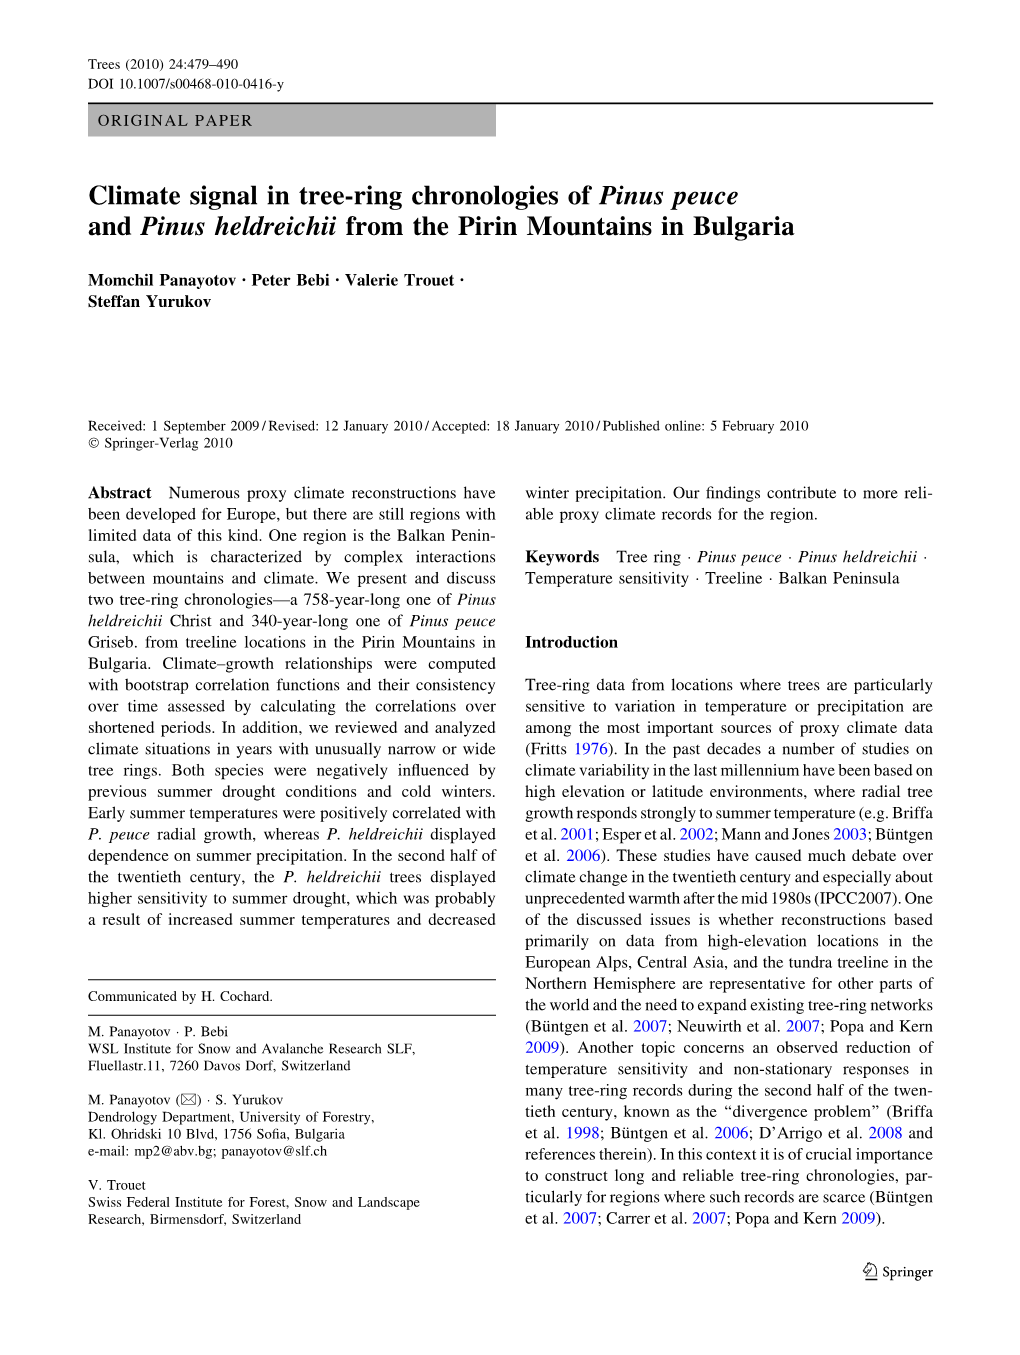 Climate Signal in Tree-Ring Chronologies of Pinus Peuce and Pinus Heldreichii from the Pirin Mountains in Bulgaria